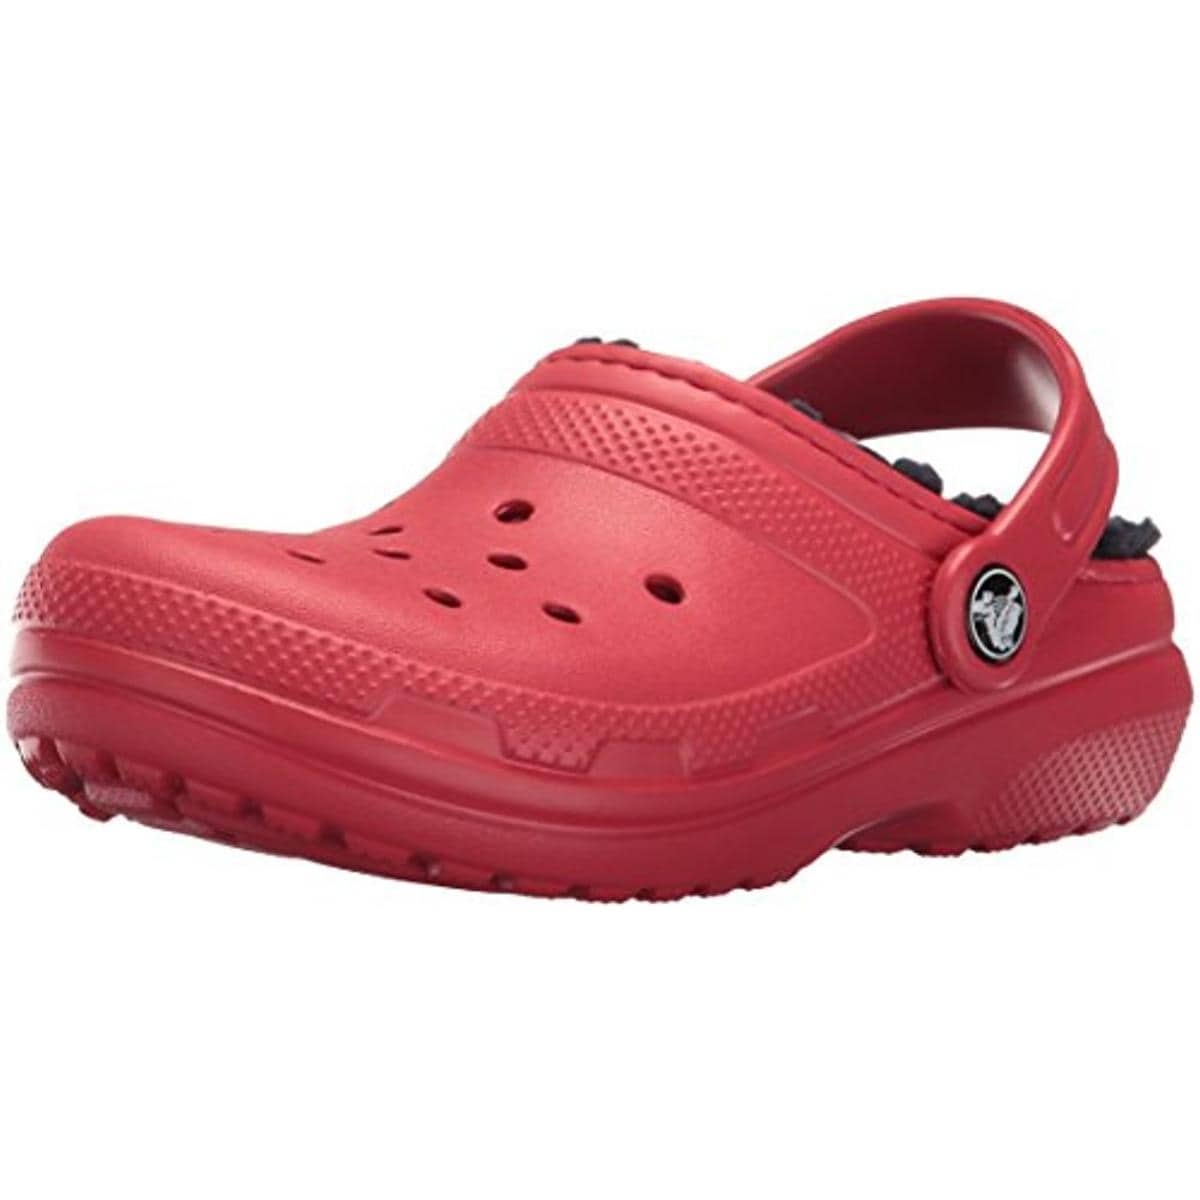 red crocs with fur inside